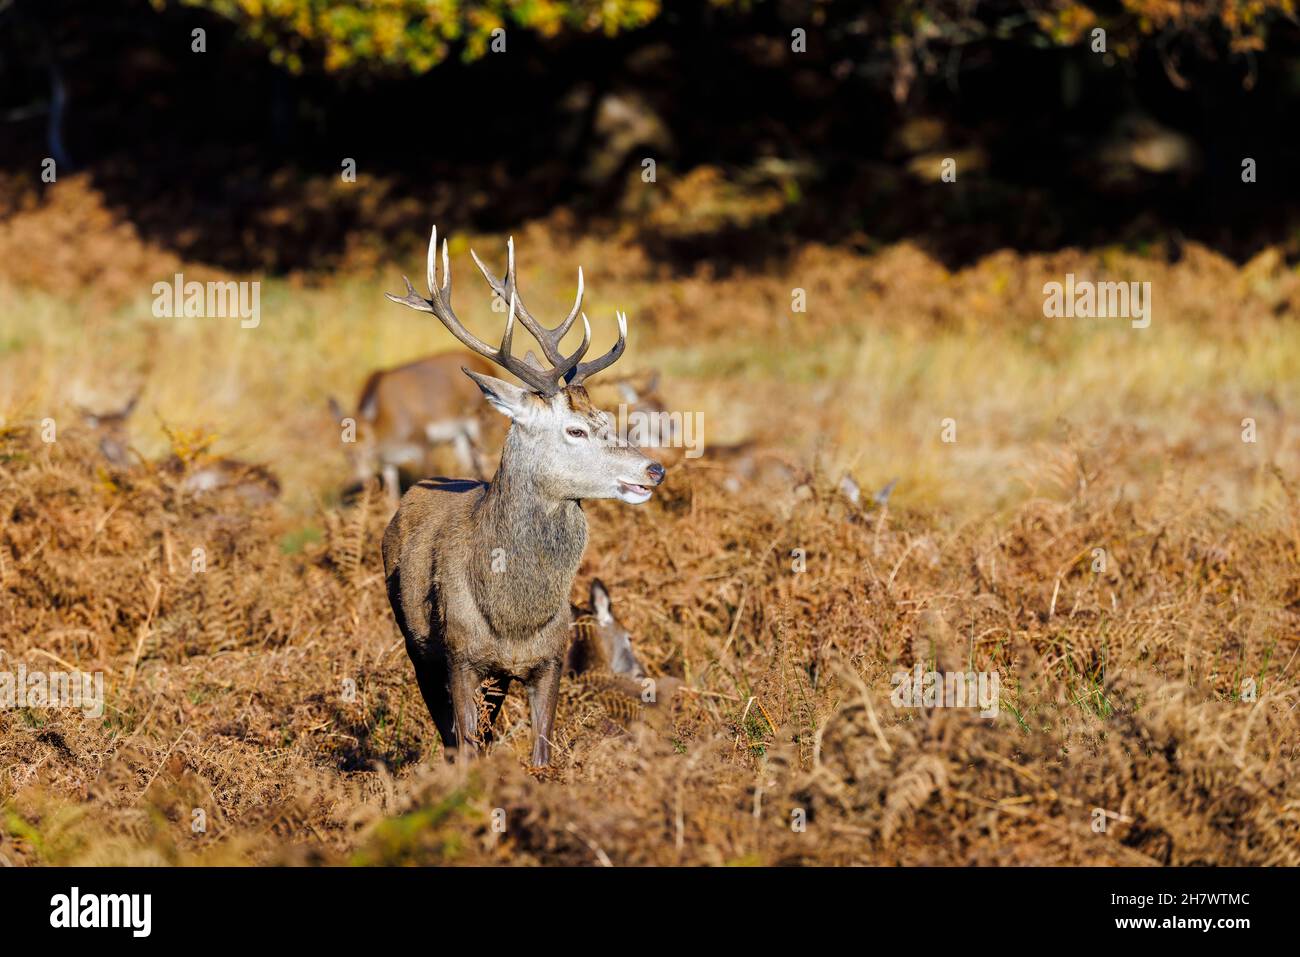 Red deer (Cervus elaphus) stag in bracken in Richmond Park, a deer park in Richmond upon Thames, London, SE England in late autumn to early winter Stock Photo